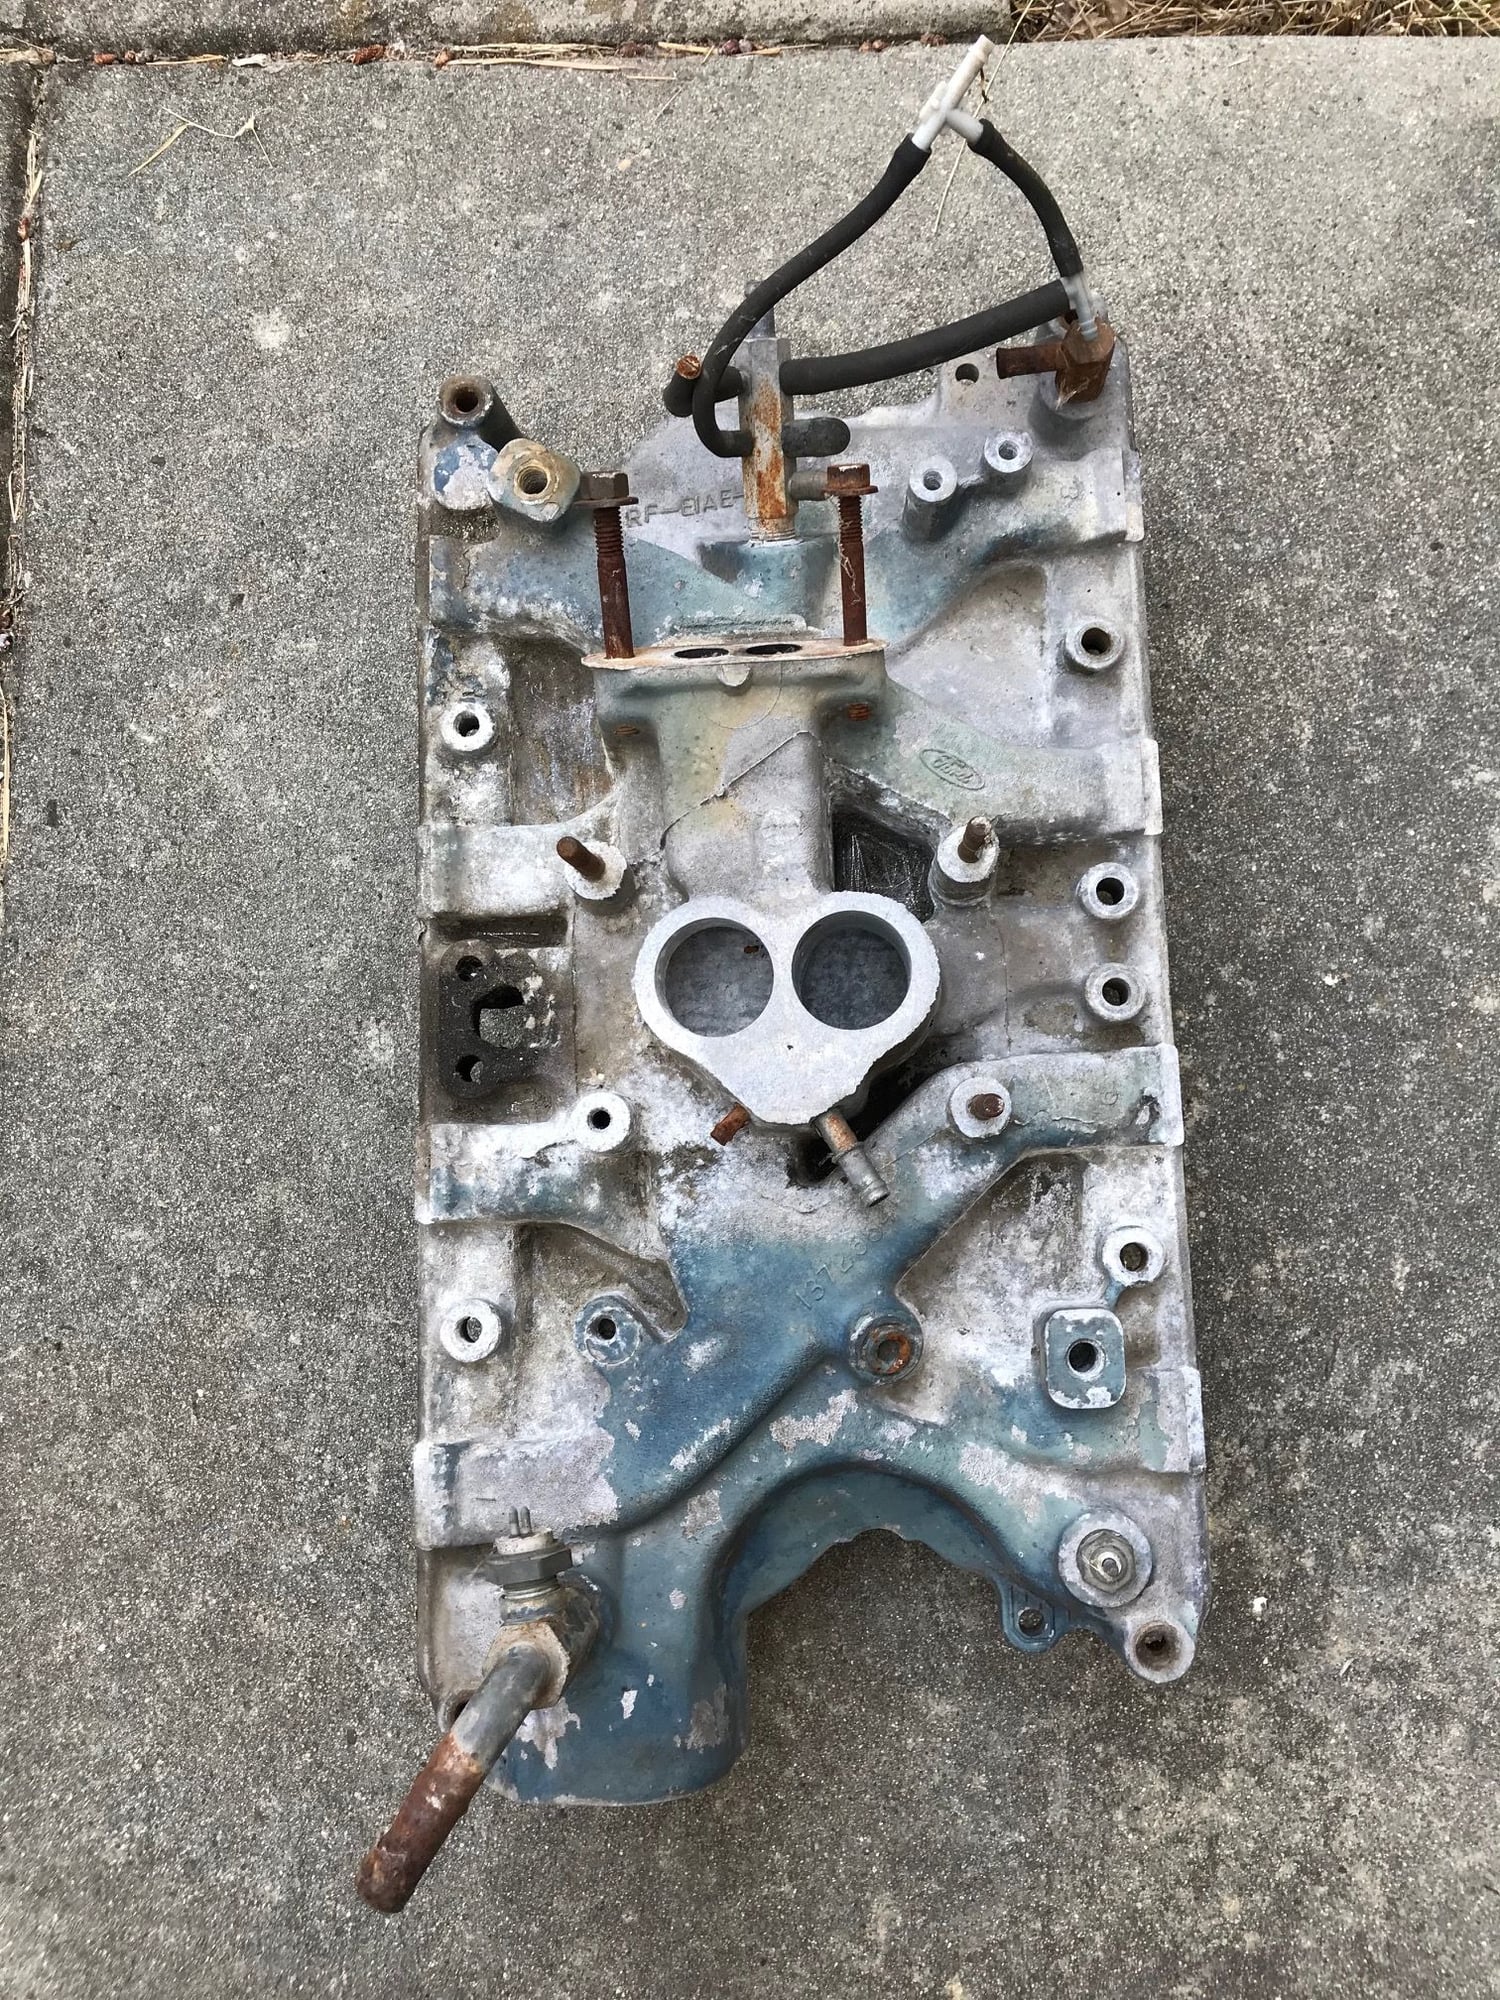 Miscellaneous - Classic Ford Auto Parts - Used - 1965 to 1966 Ford 1/2 Ton Pickup - 1965 to 1966 Ford Mustang - San Jose, CA 95148, United States